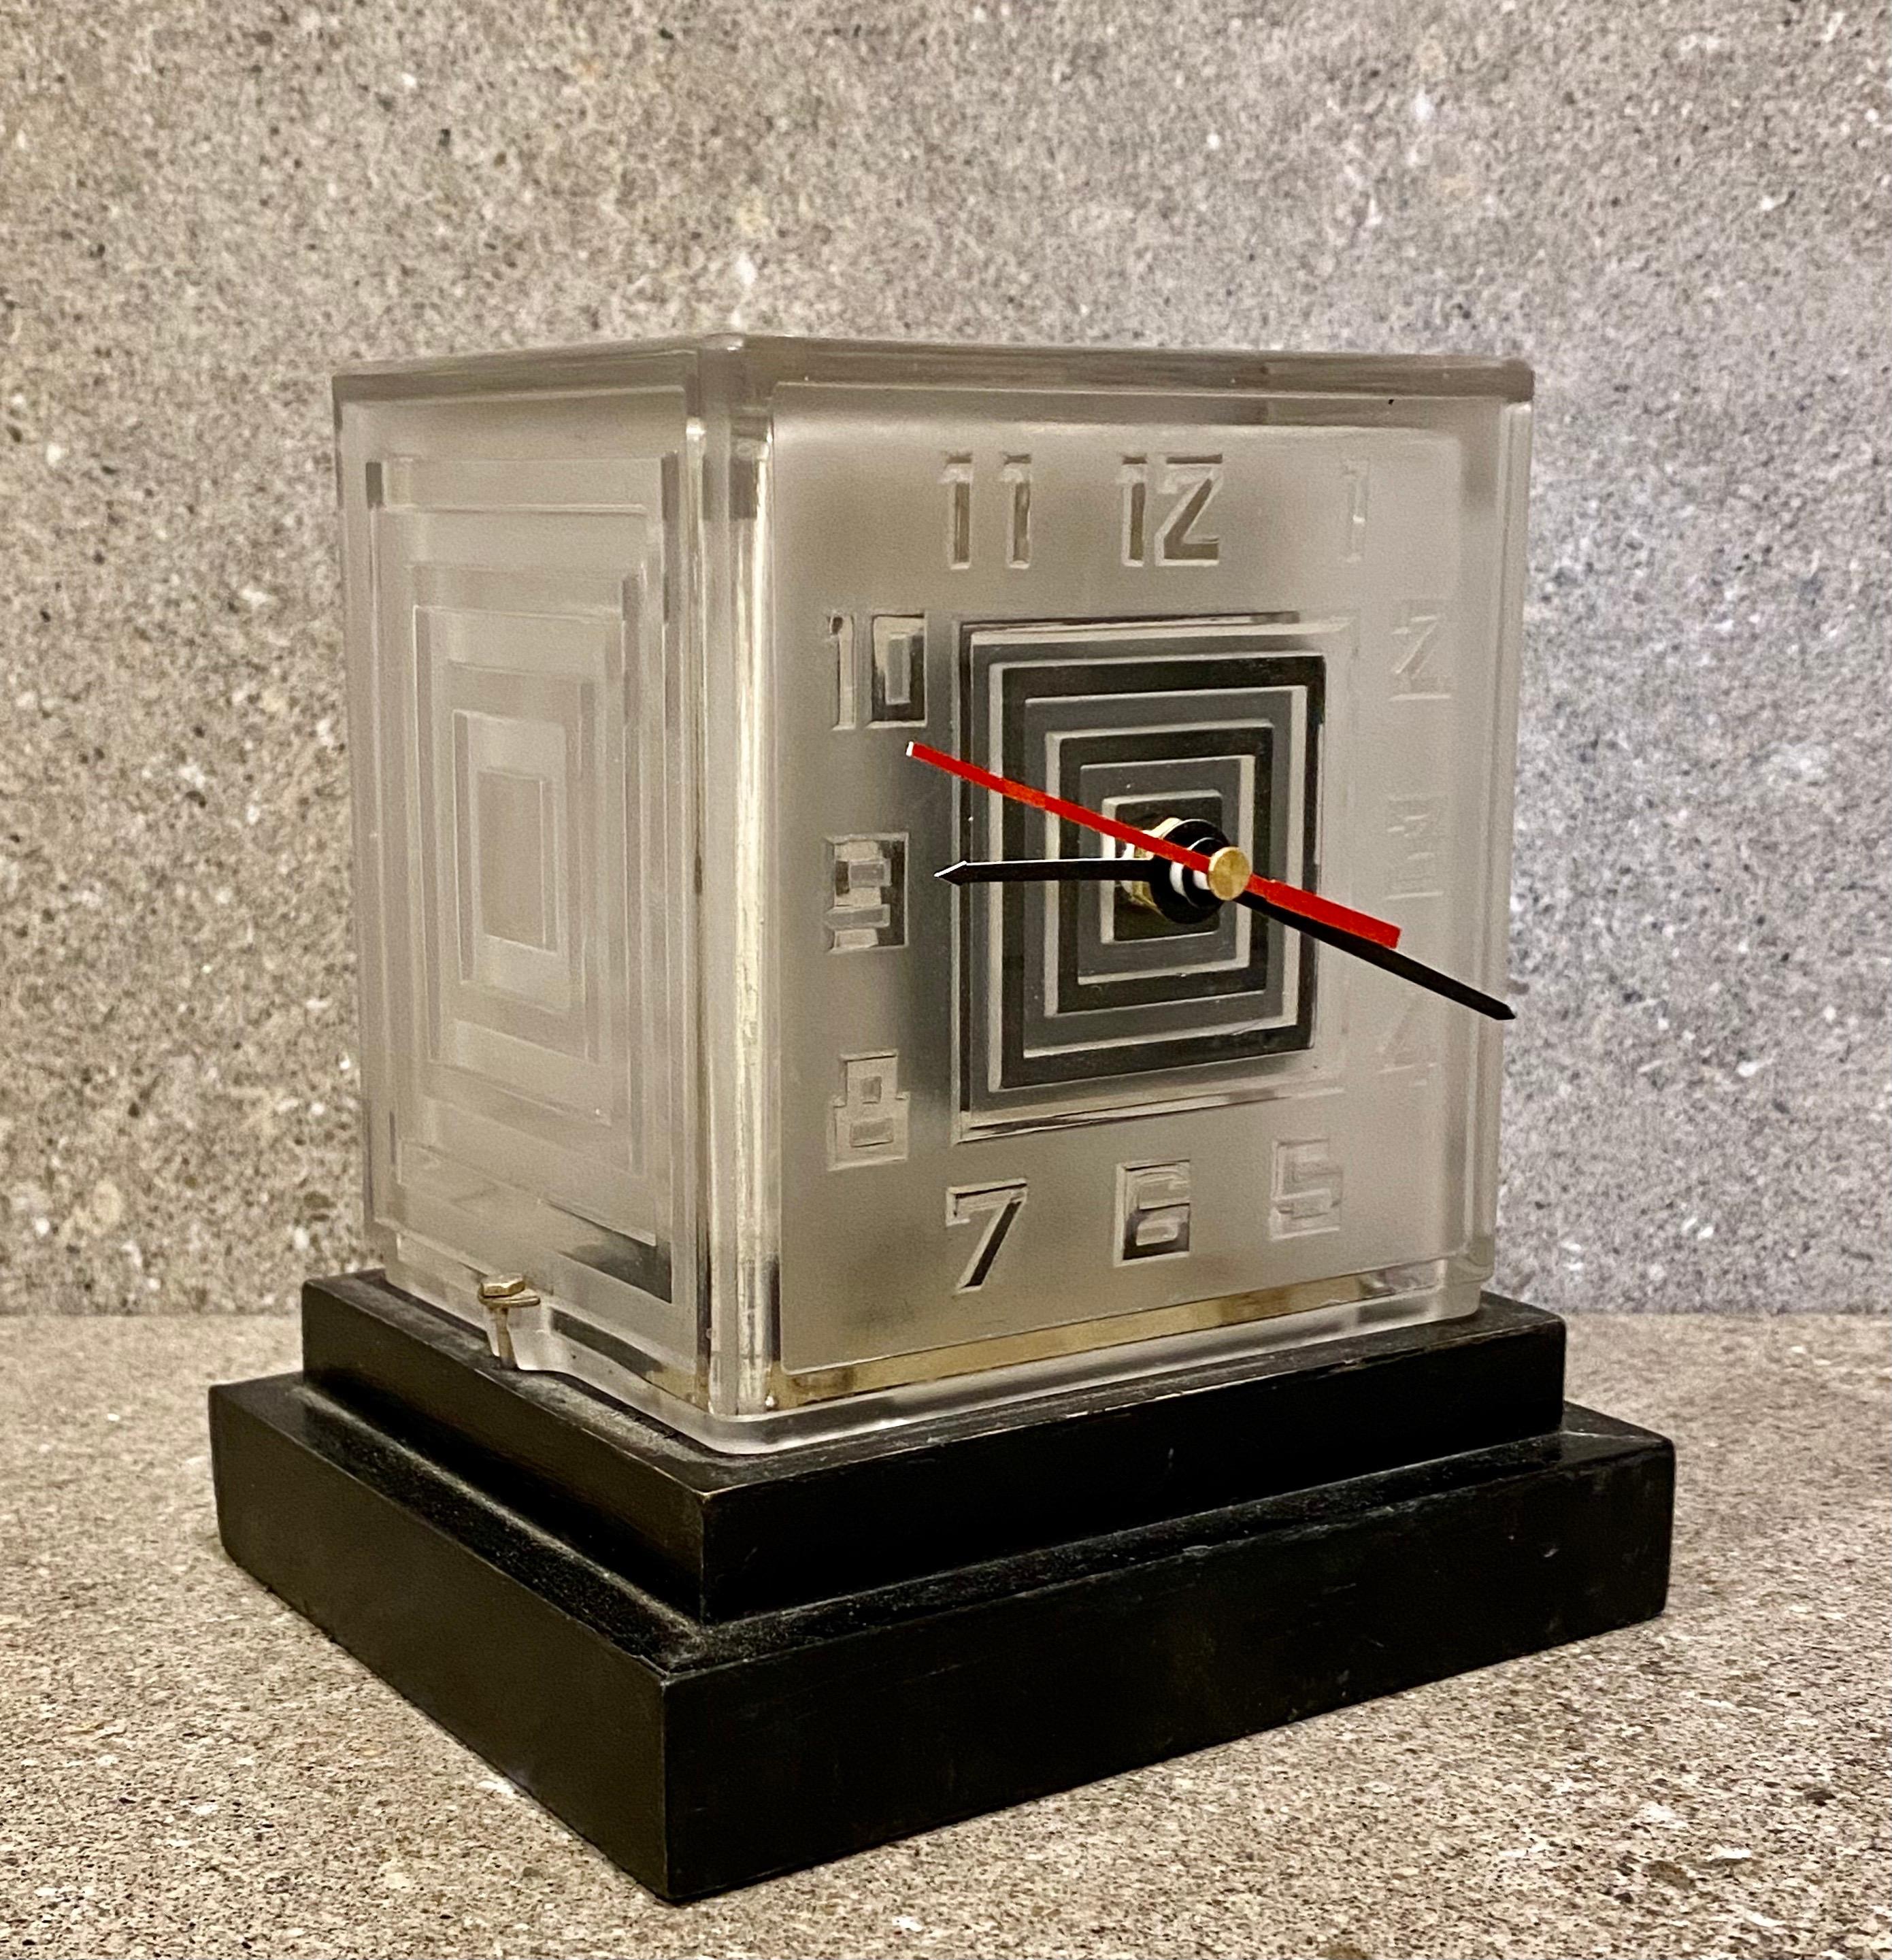 A Art Deco modernist Bulle clock by P.M.Favre. One of the first battery operated clocks of the 1930's. The frosted glass case has etched stylised numerals. The stepped wooden plinth is ebonised.
Although the original battery size is no longer